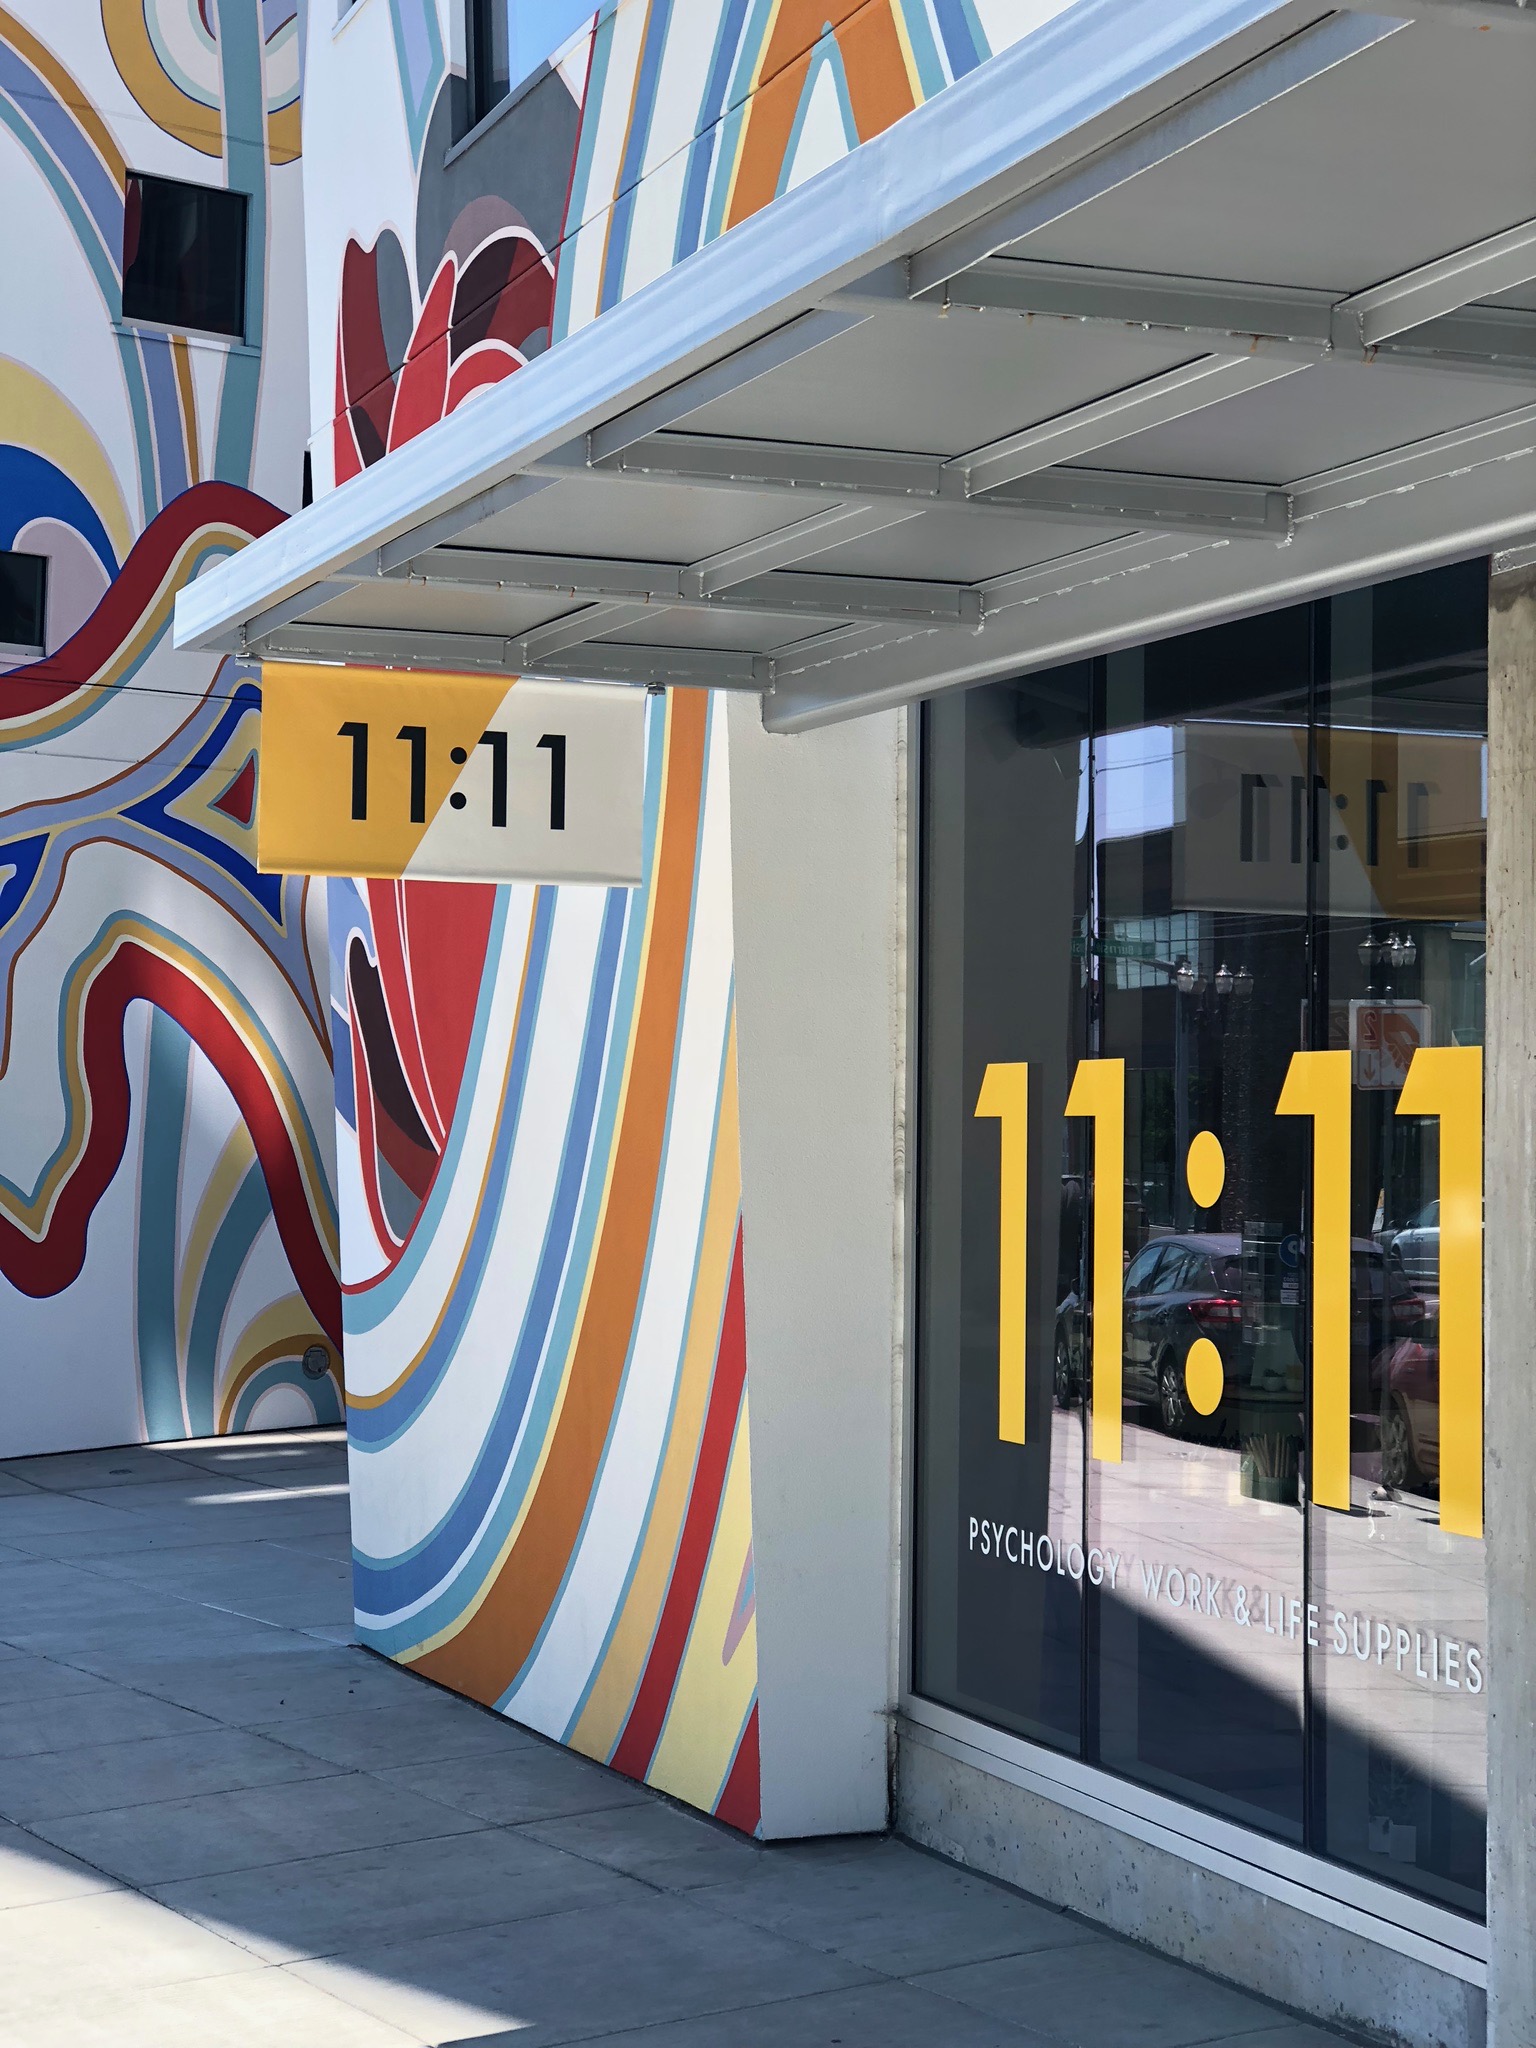 11:11 Supply is now open at the corner of MLK and Burnside in the iconic Fair-Haired Dumbbell building.